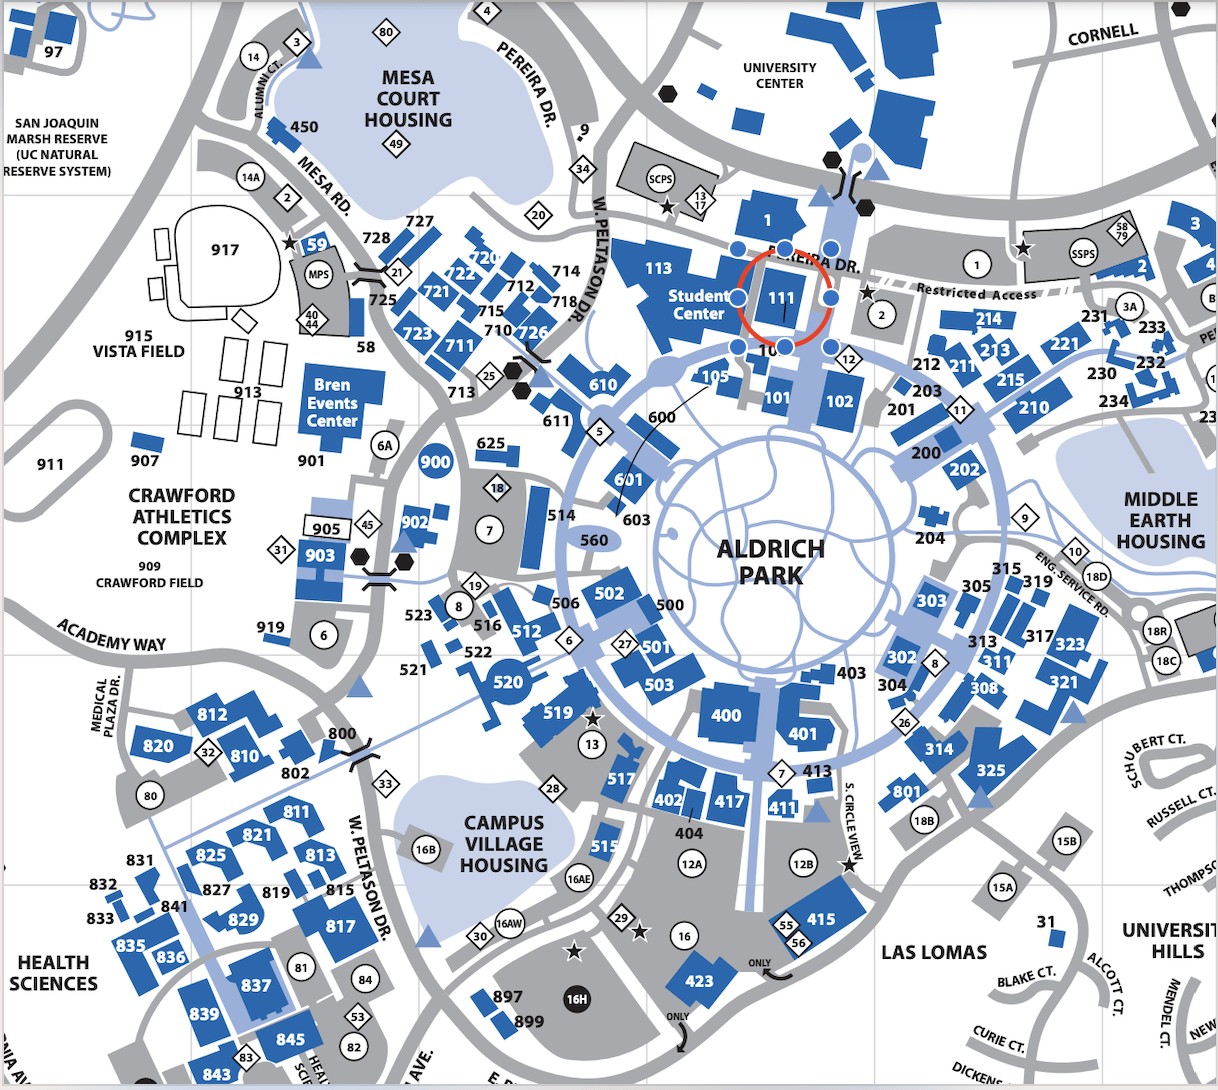 Color map of UCI campus with Aldrich Hall circled in red.